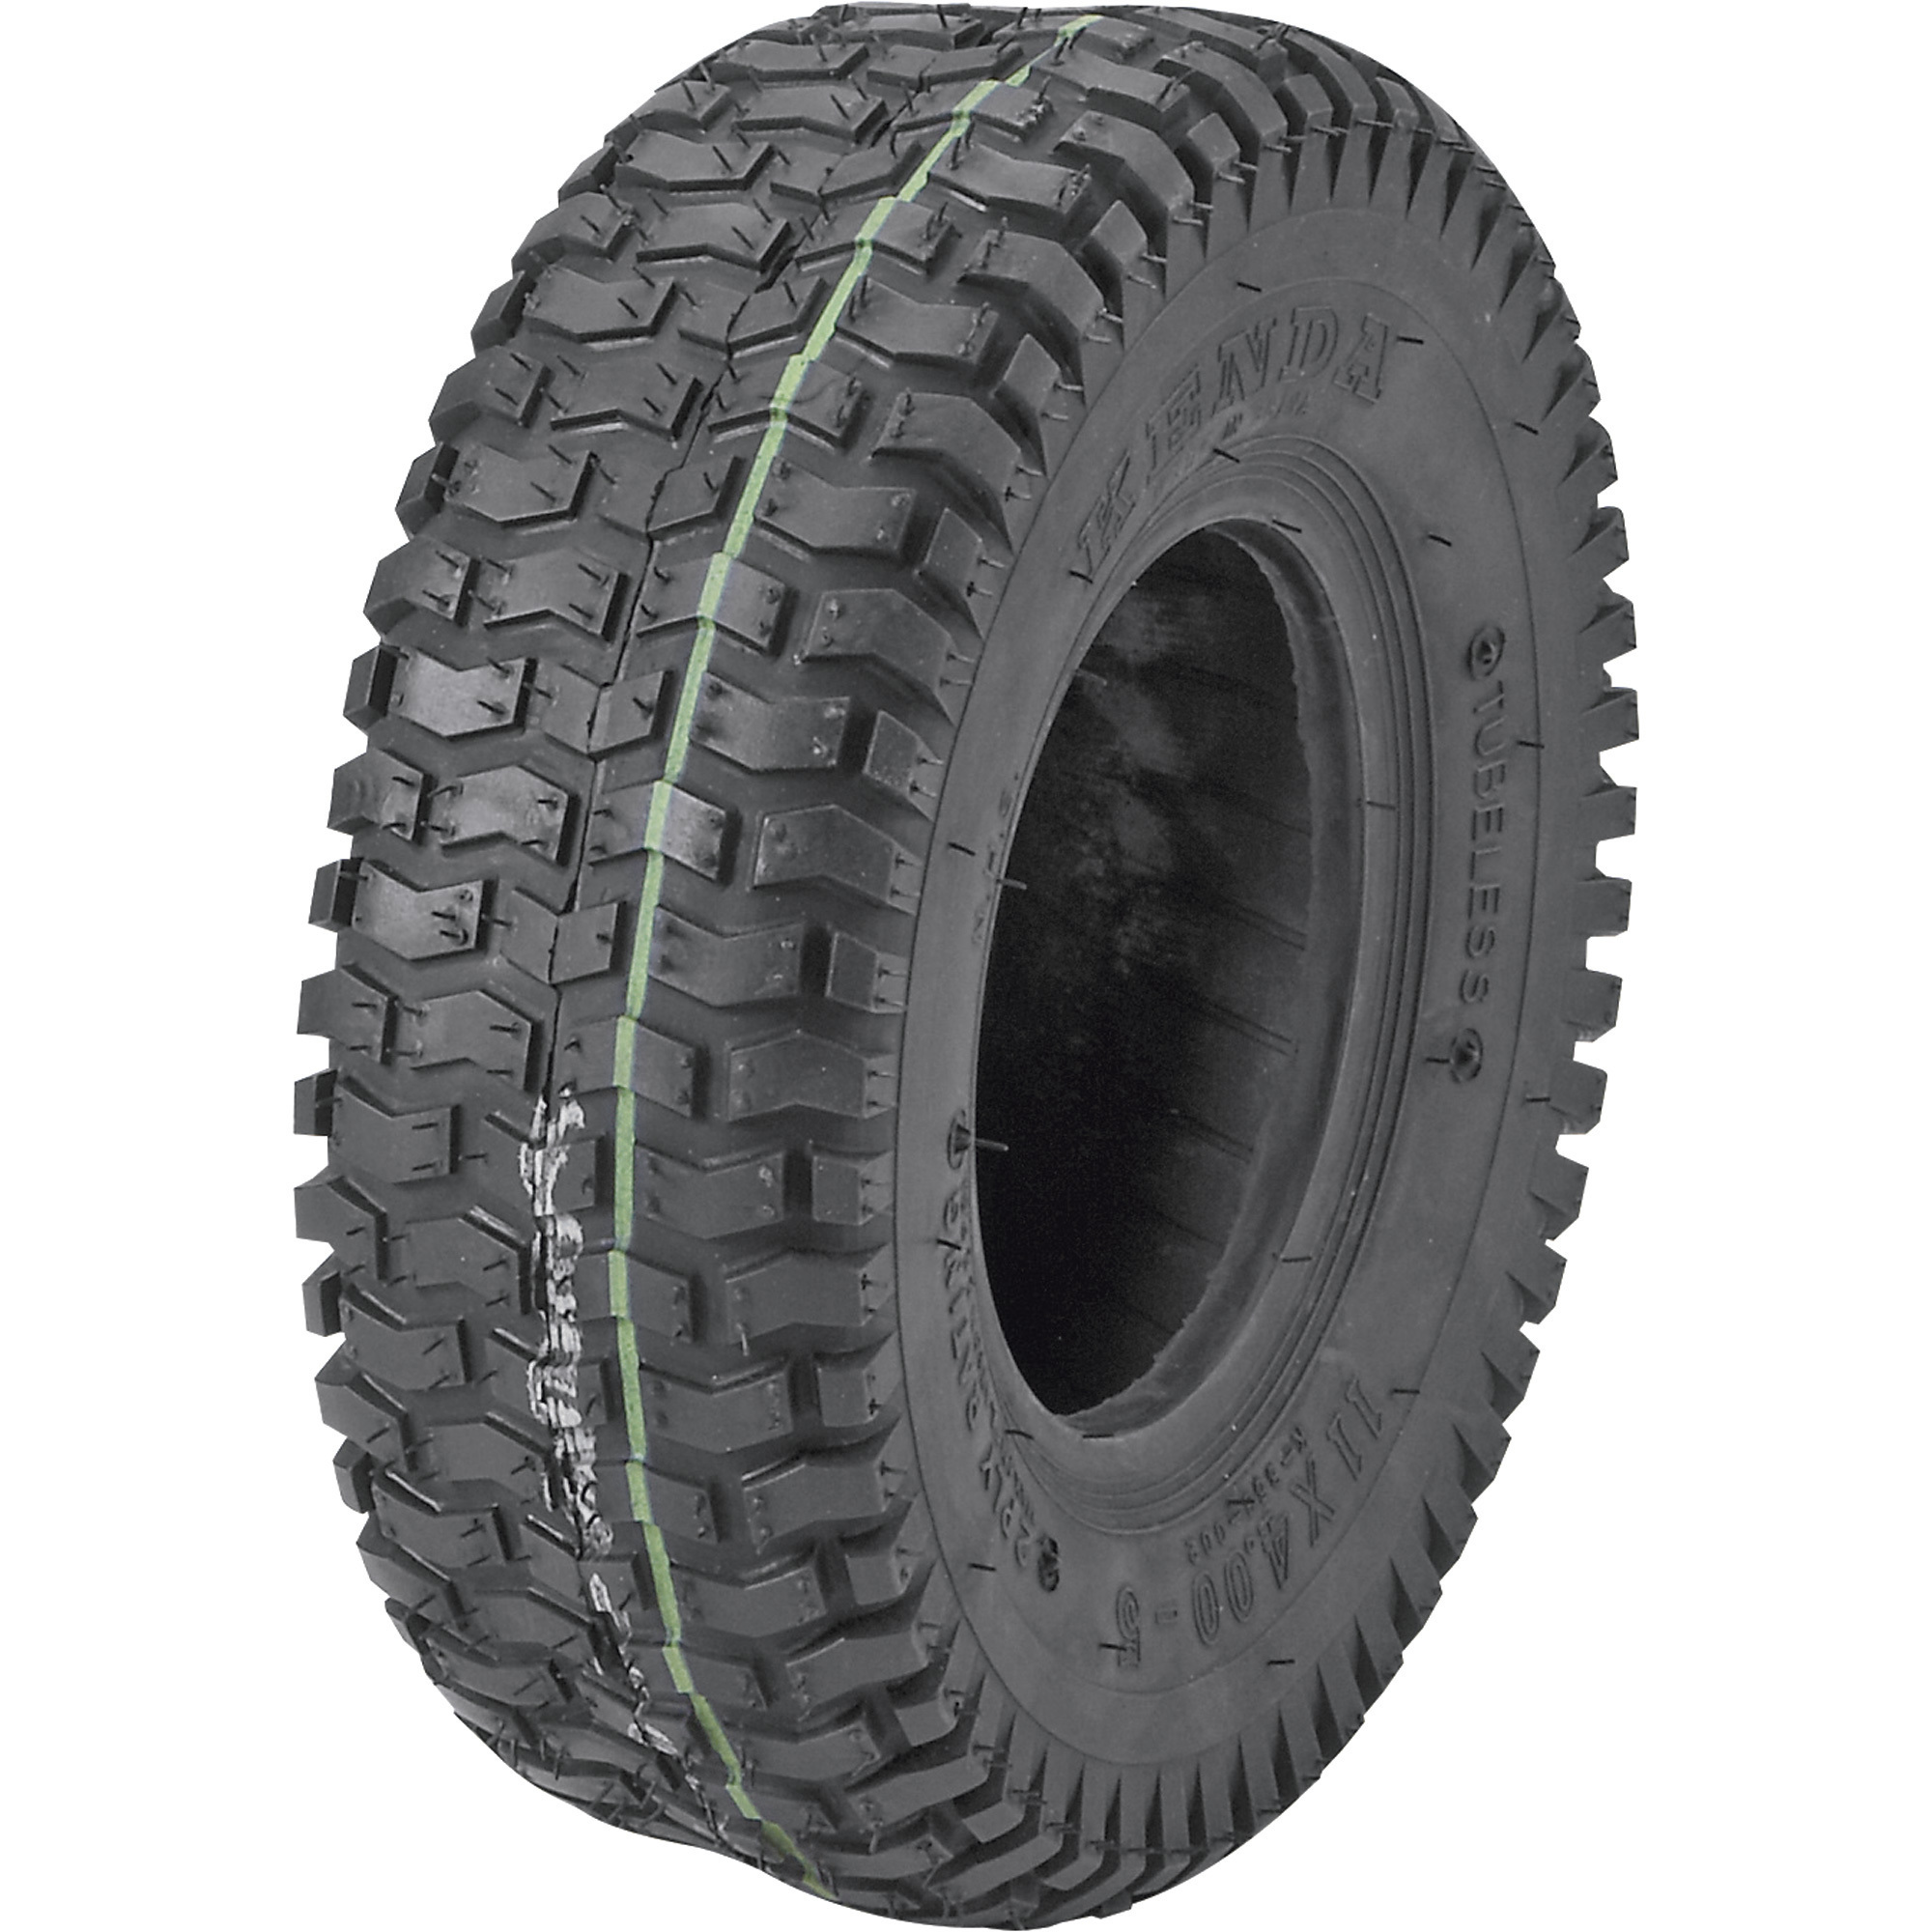 Kenda Lawn and Garden Tractor Tubeless Replacement Turf Tire â 18 x 950-8